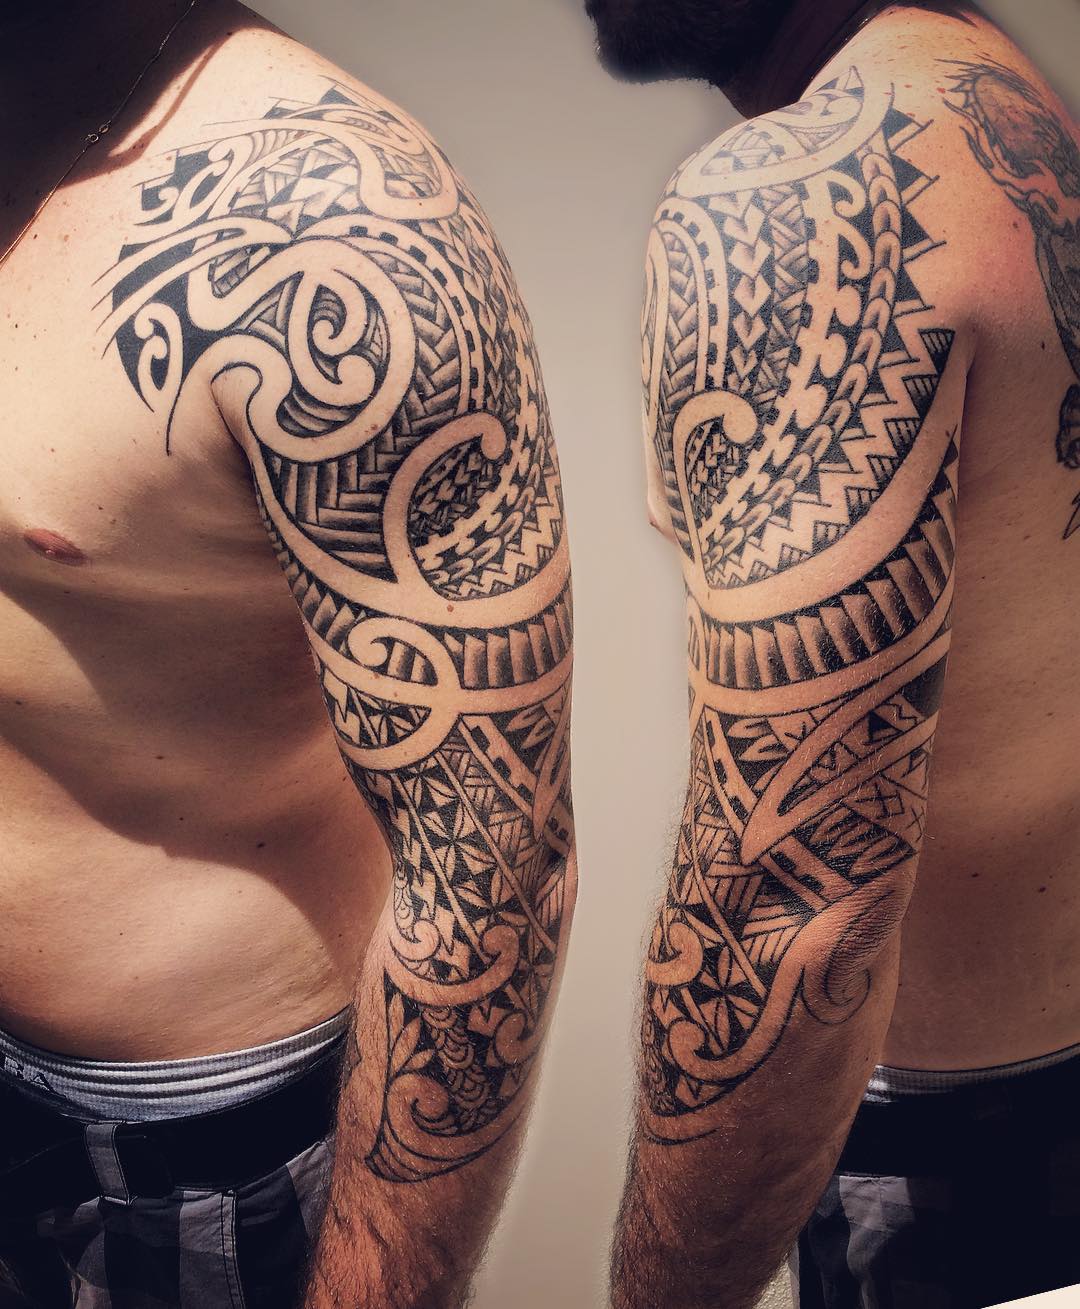 55+ Best Maori Tattoo Designs & Meanings - Strong Tribal Pattern (2019)